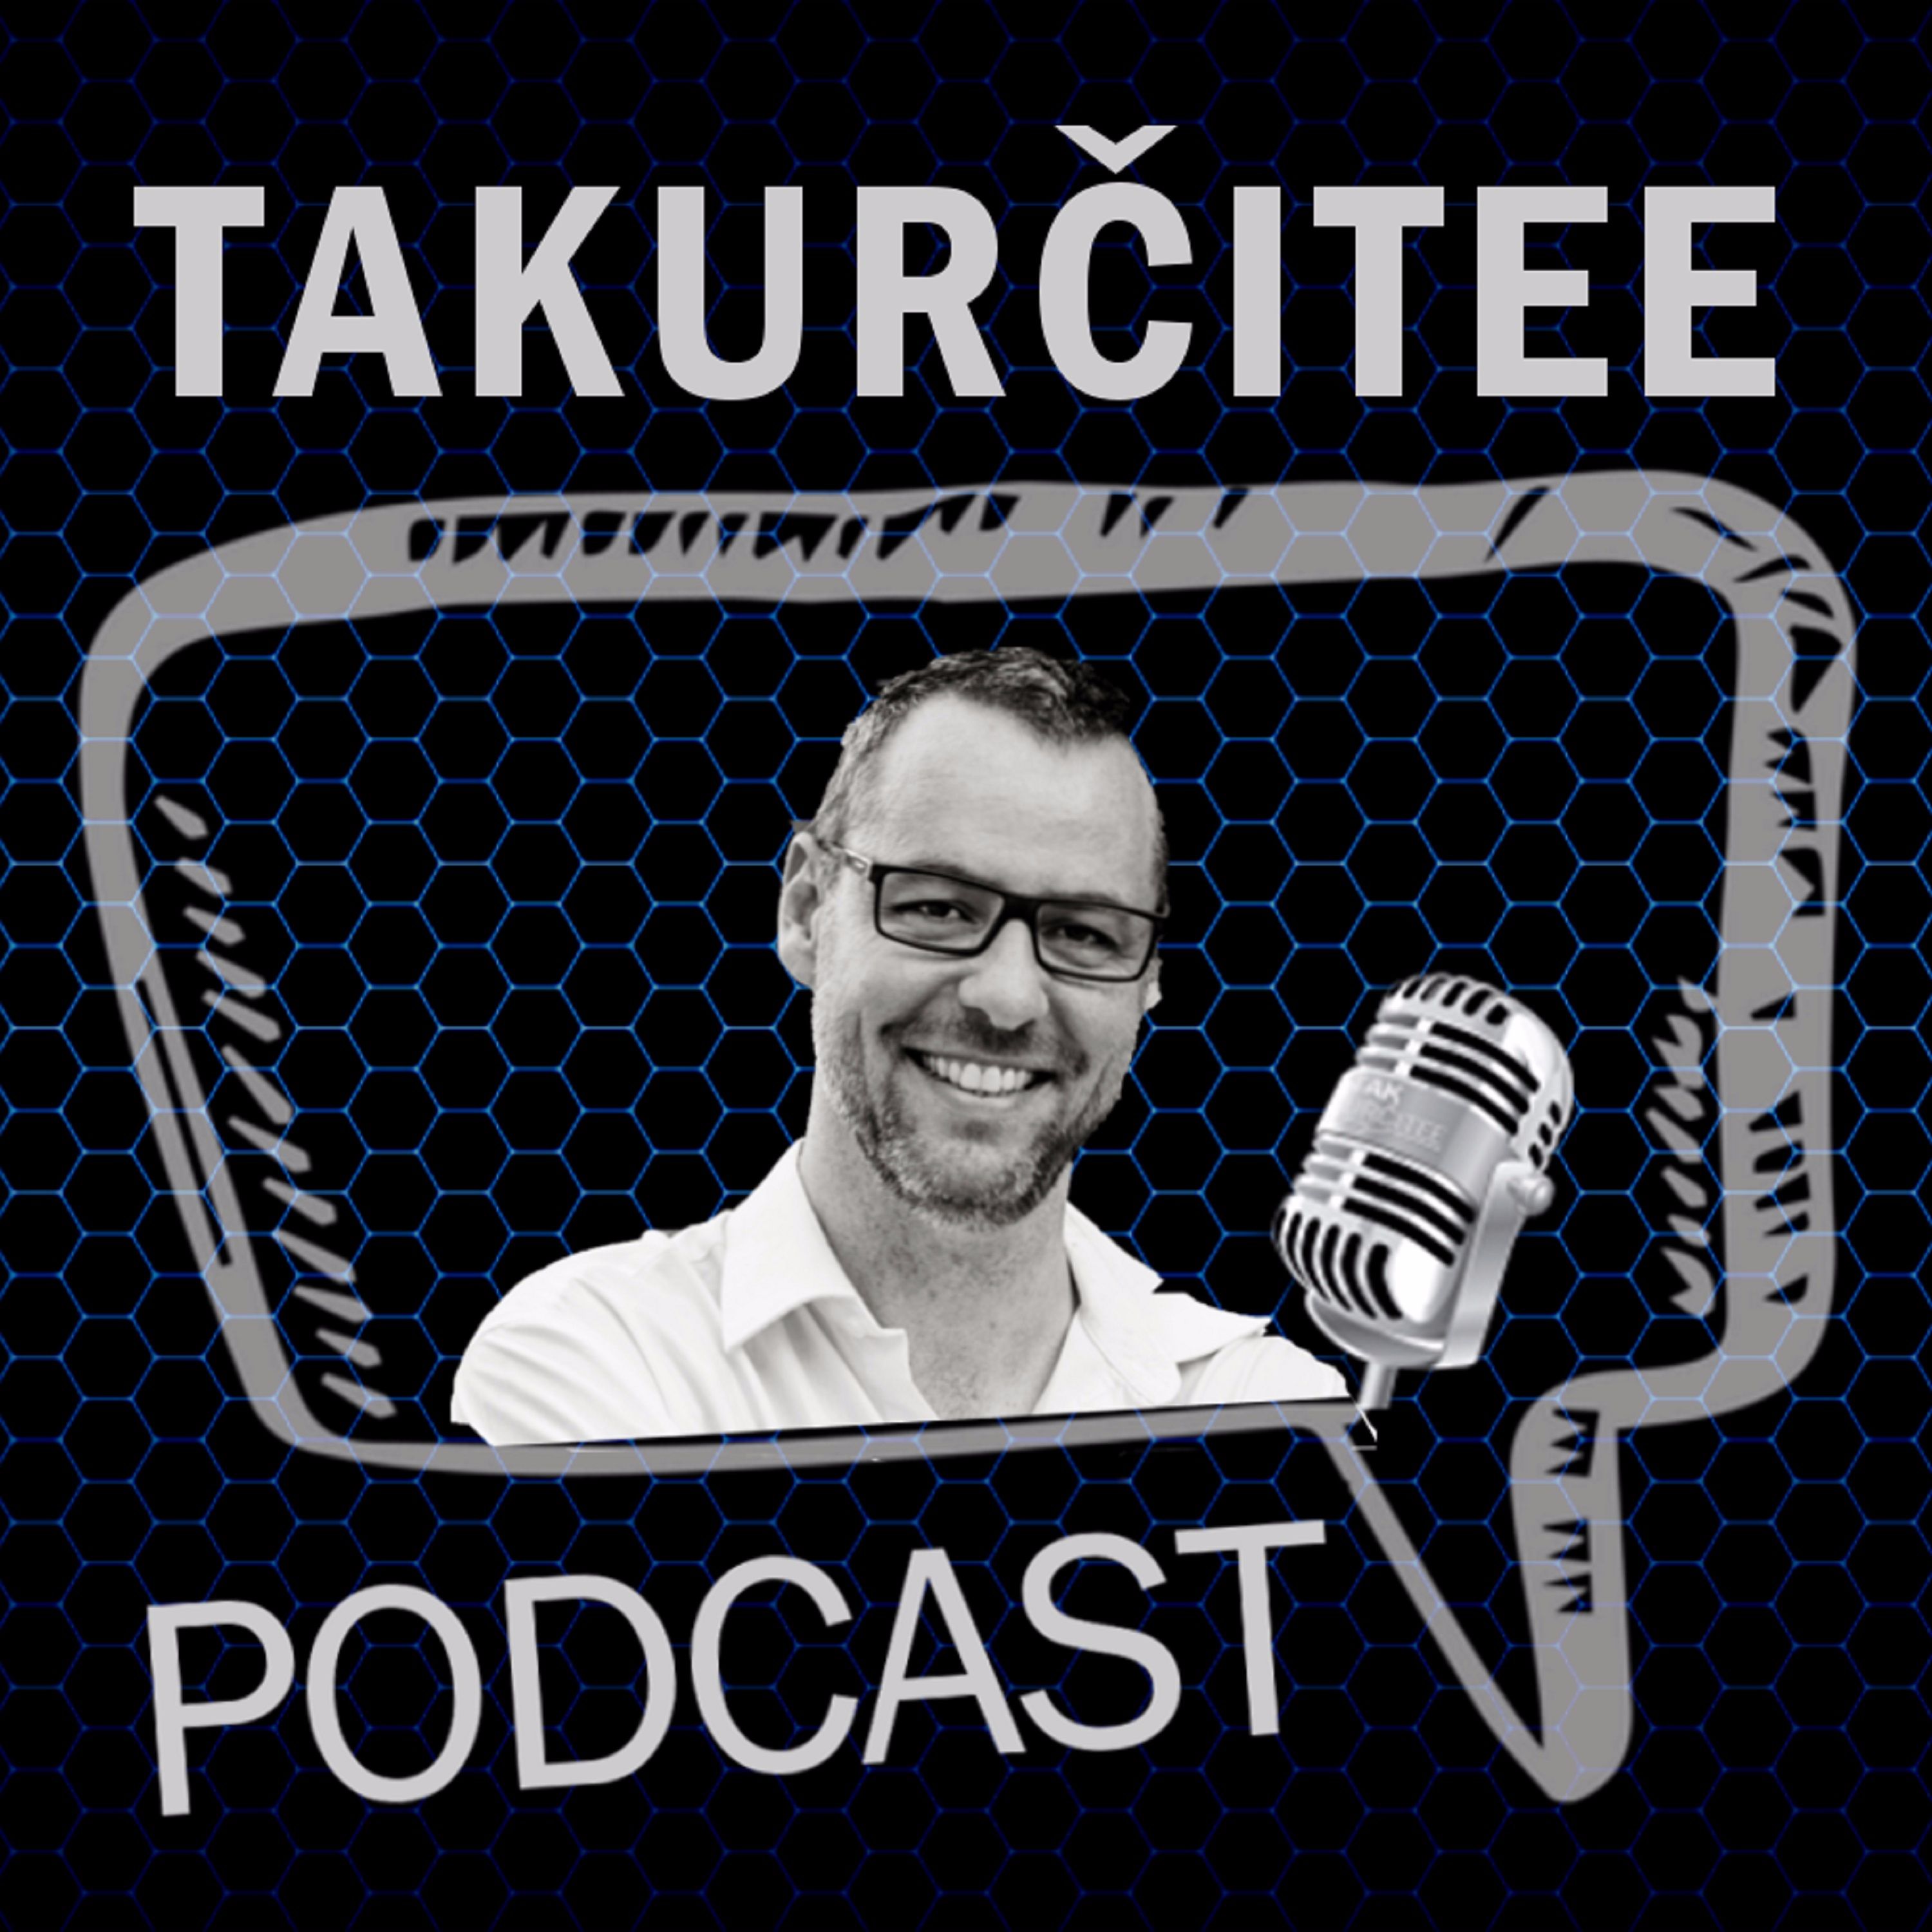 TakUrčitee Podcast, Ep. 20: French Open 2017